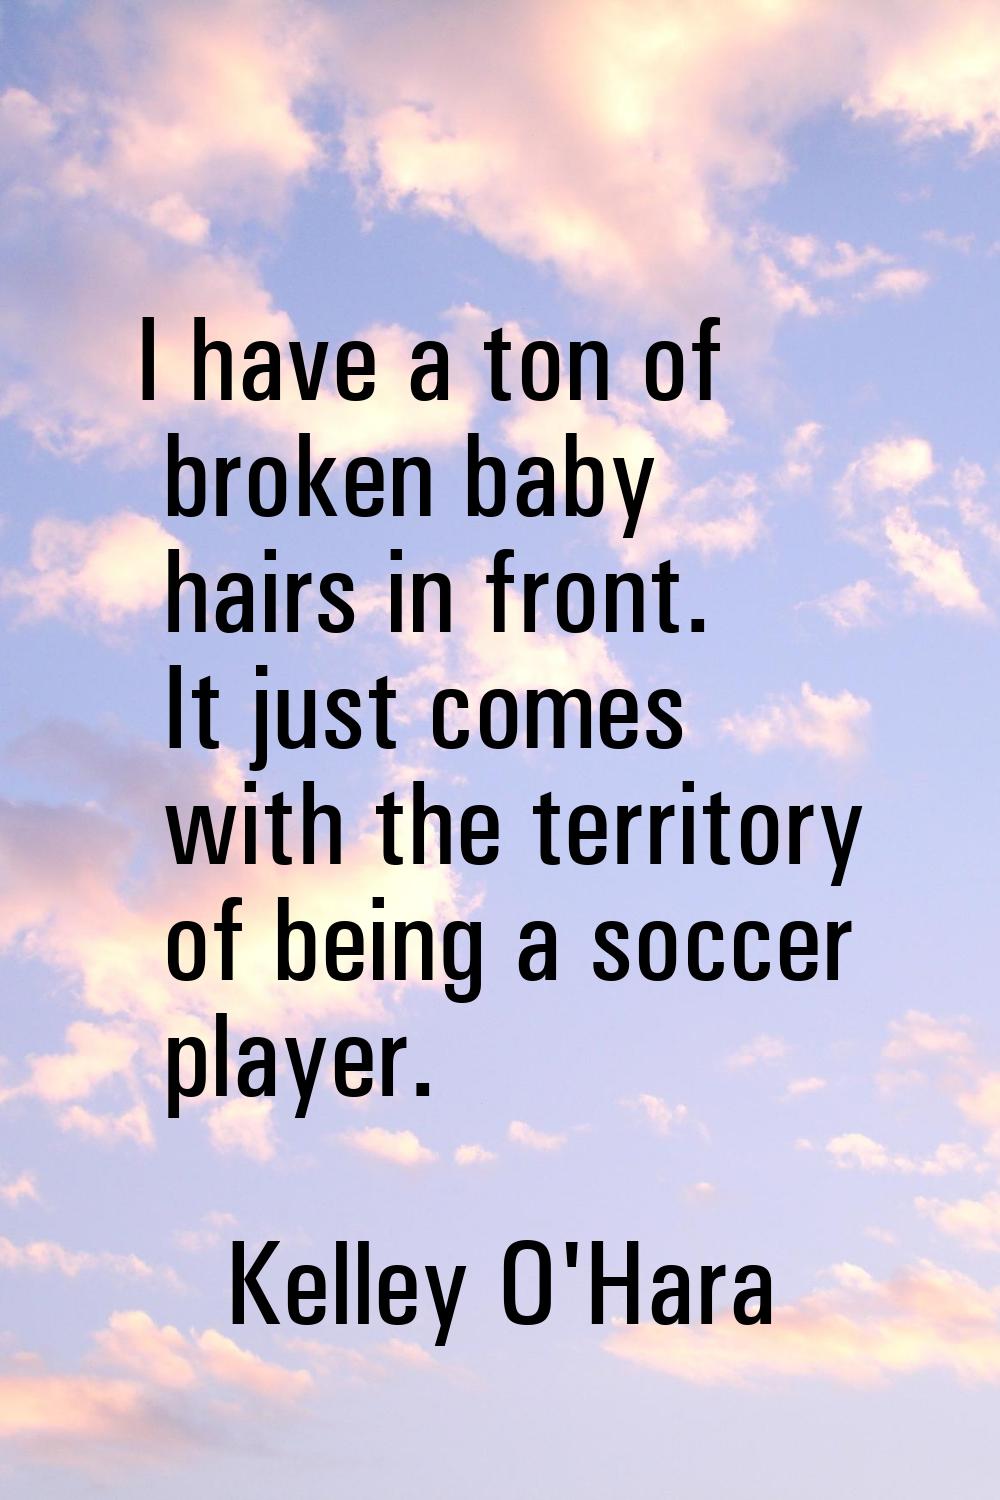 I have a ton of broken baby hairs in front. It just comes with the territory of being a soccer play